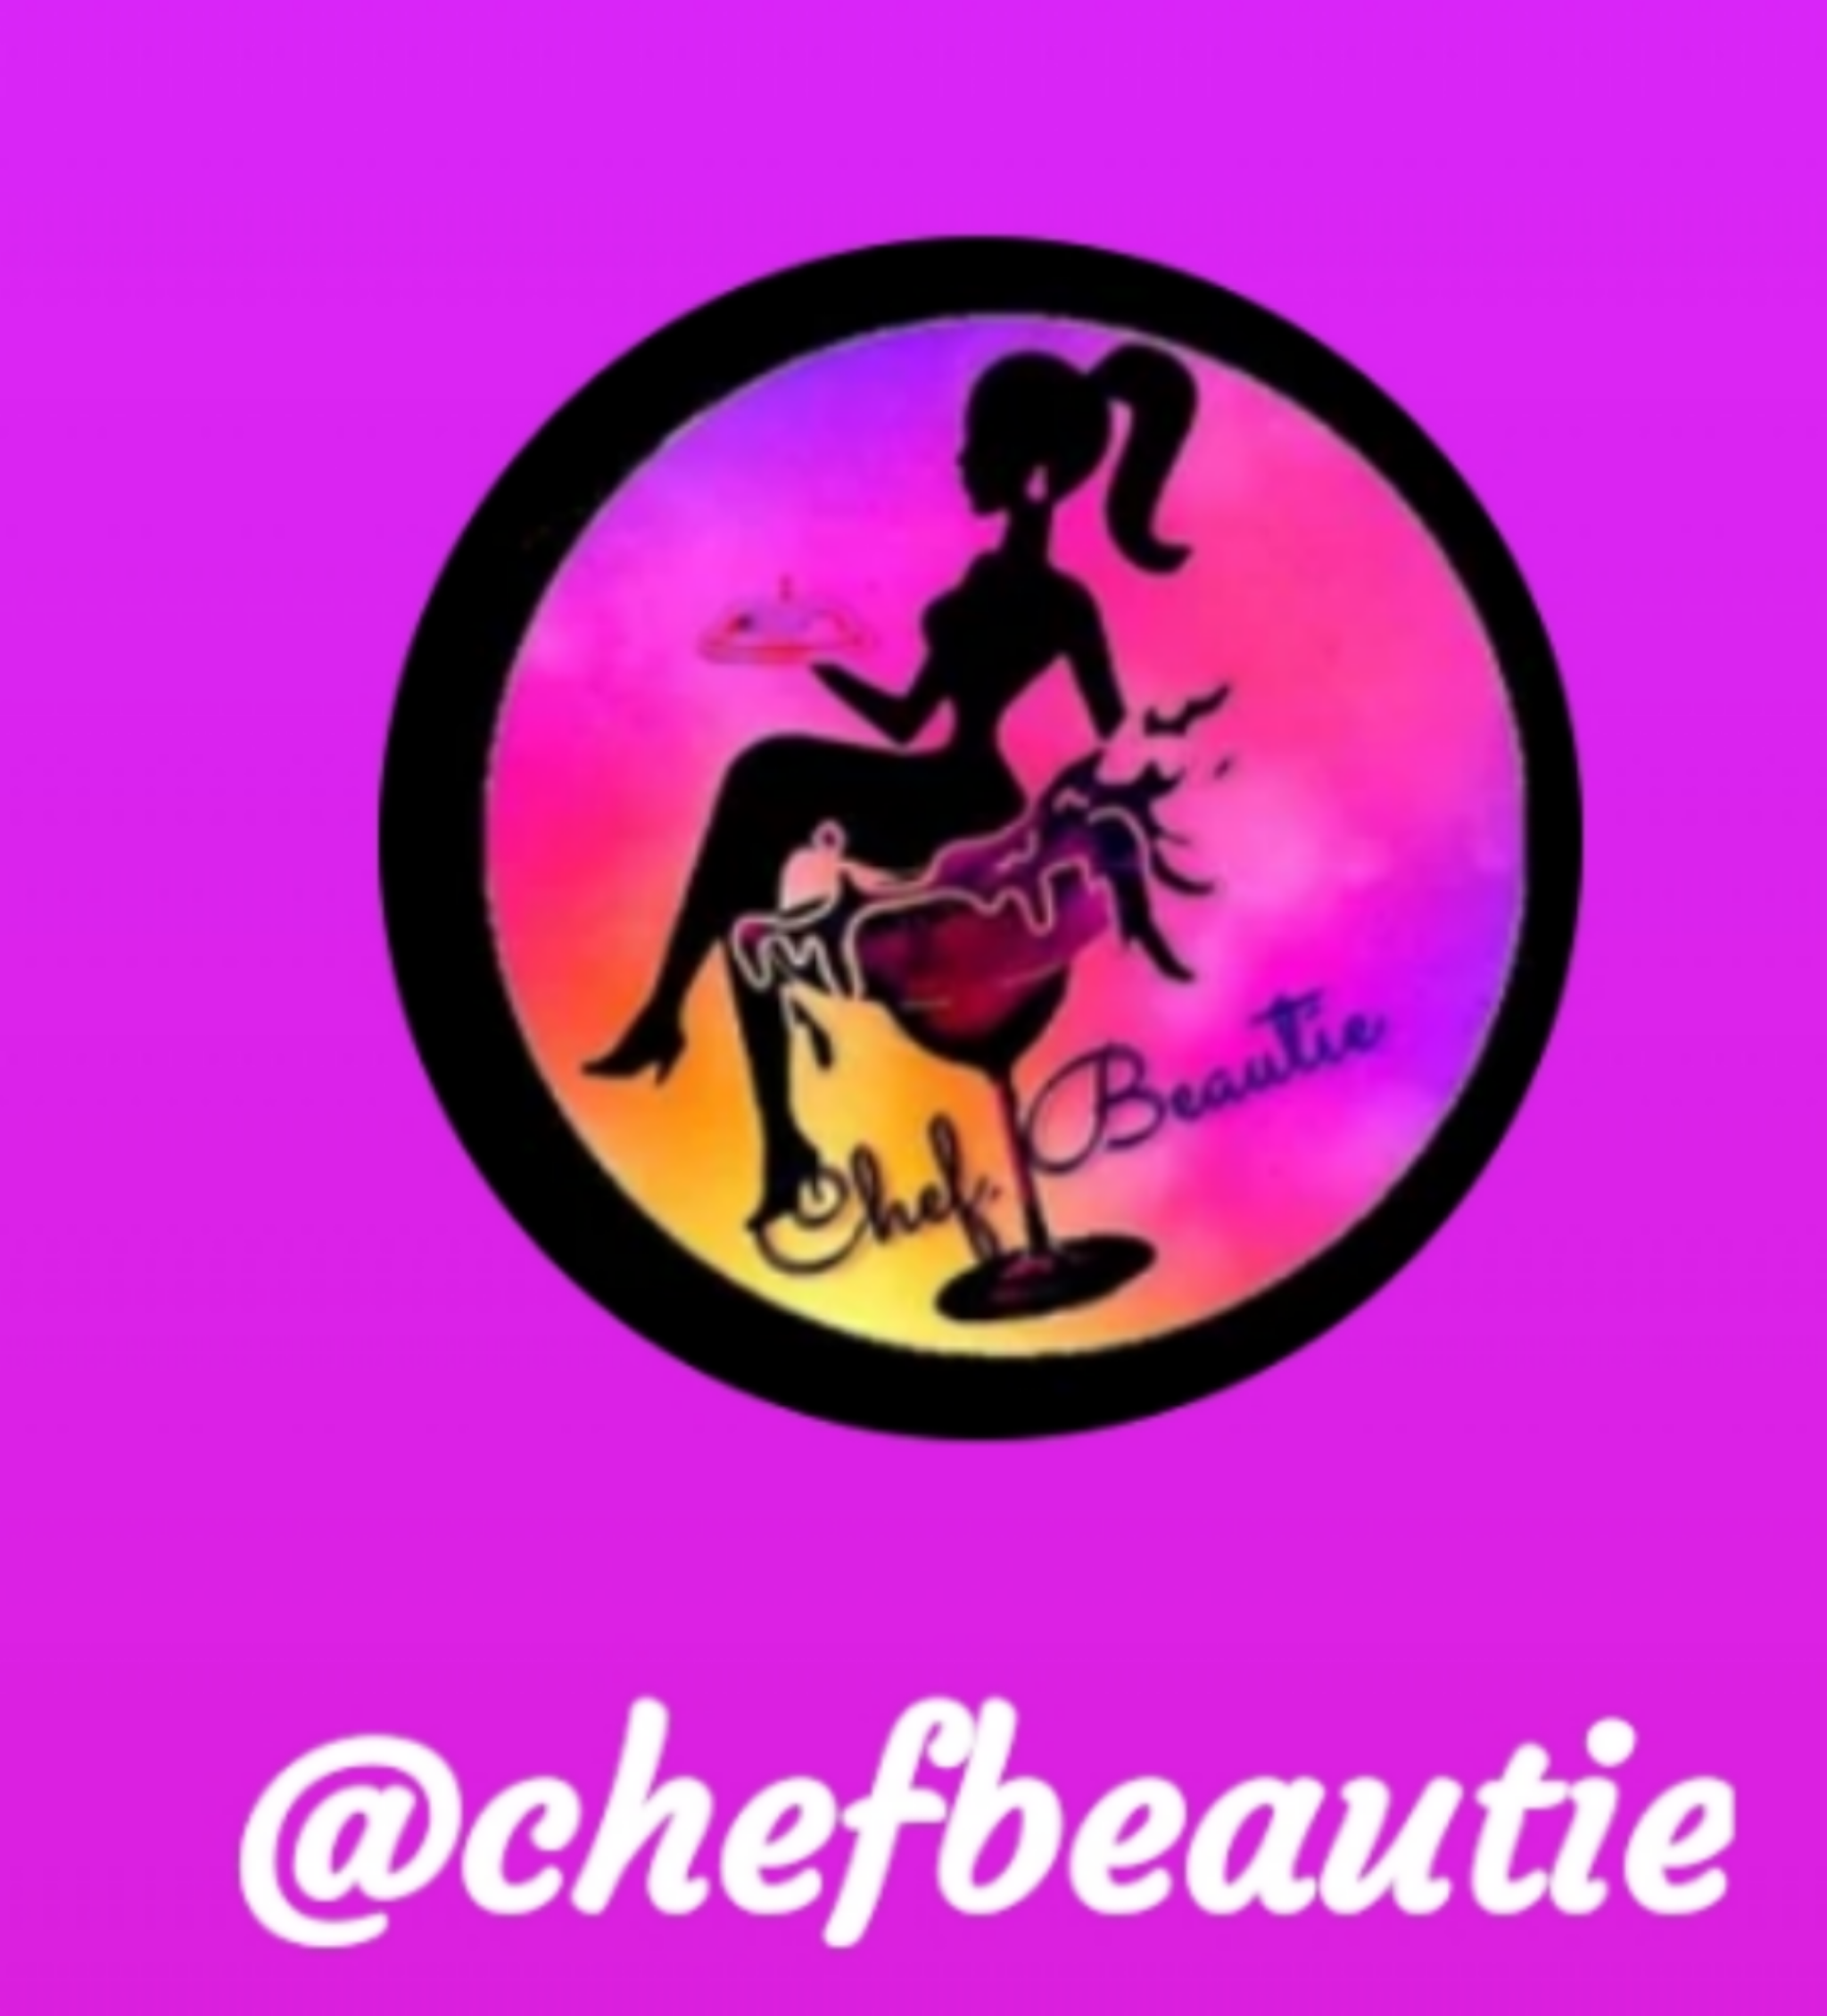 Art for Chef Beautie Catering by IG: @chefbeautie